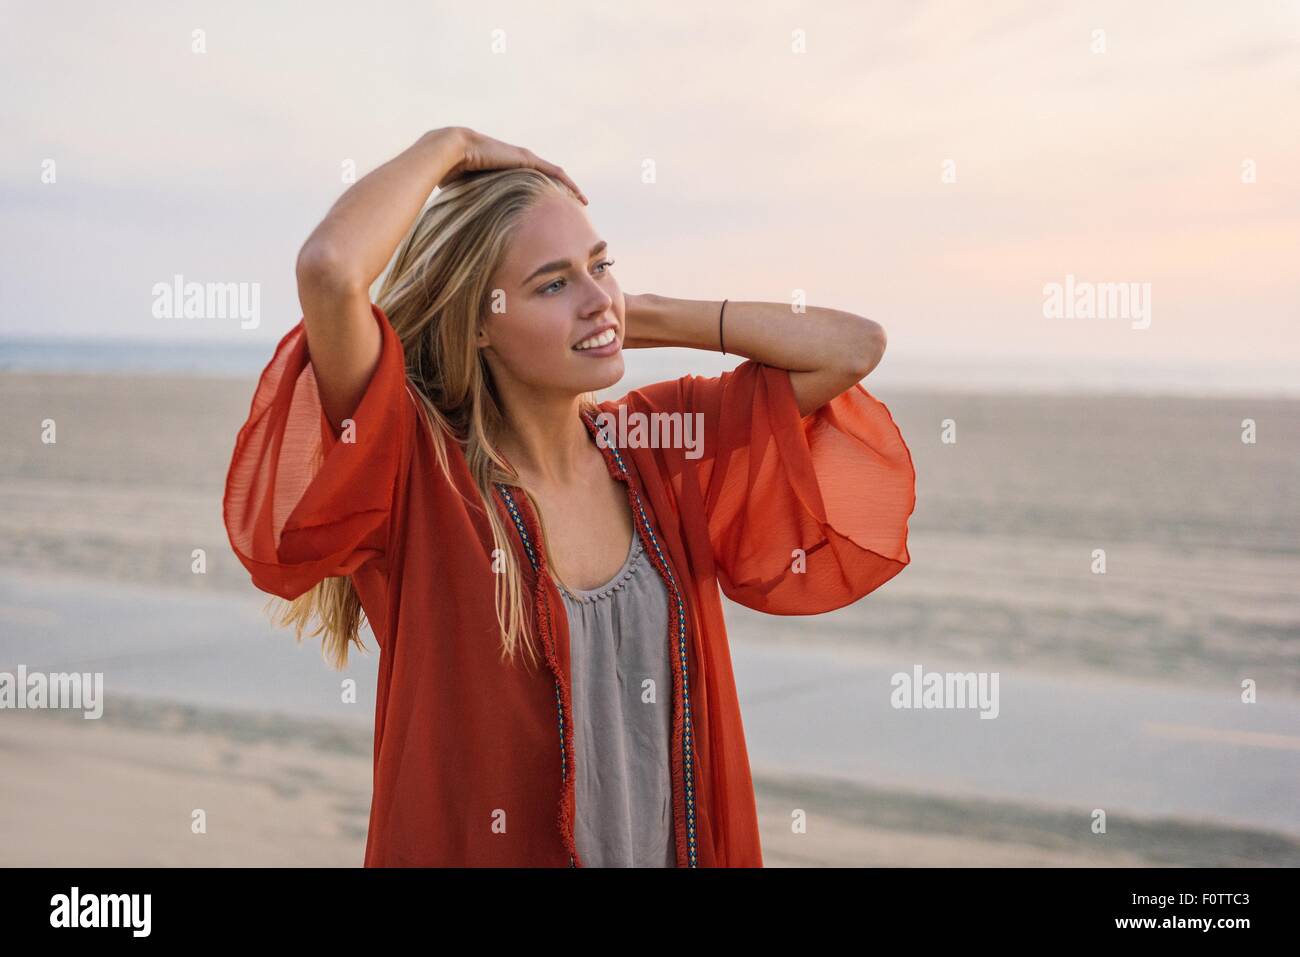 Young woman standing on beach, looking at view Stock Photo